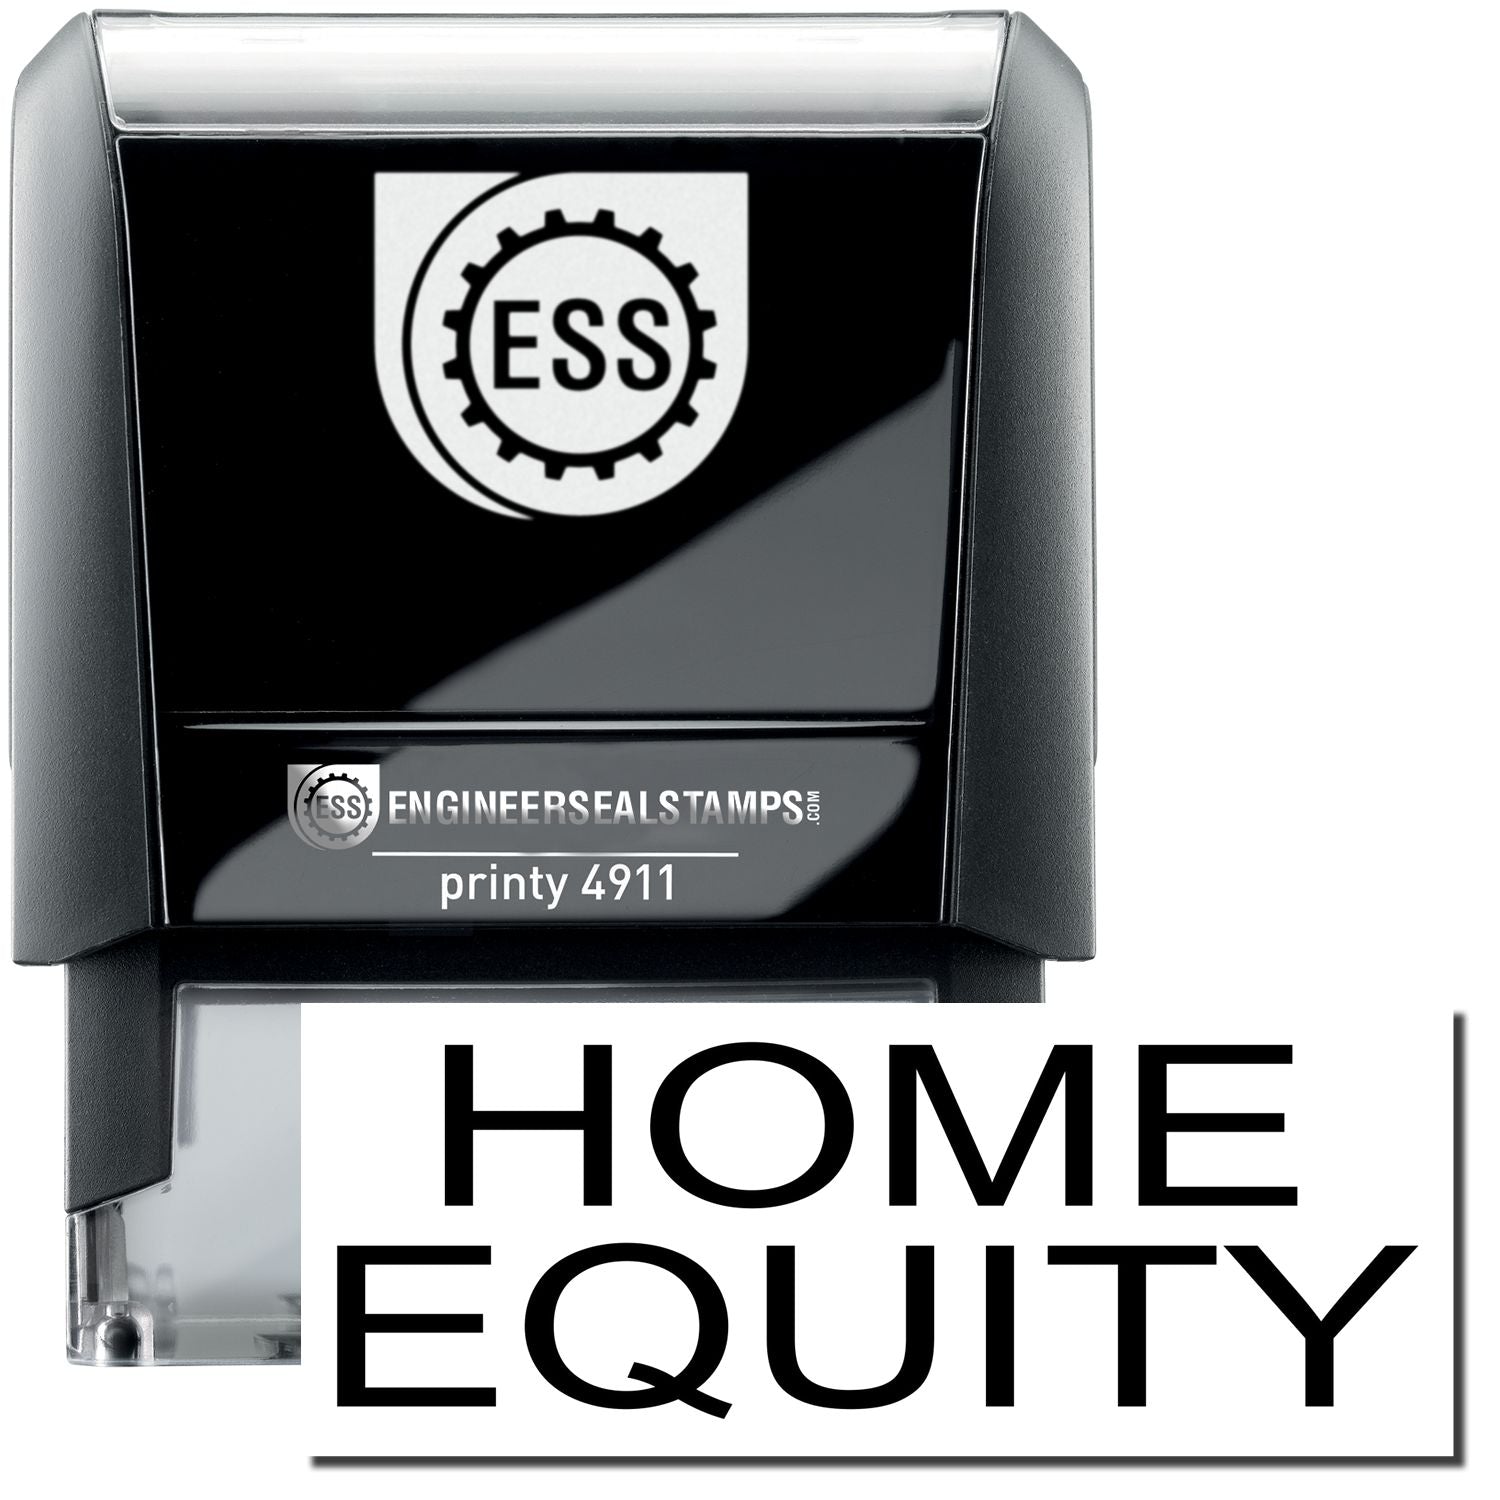 A self-inking stamp with a stamped image showing how the text "HOME EQUITY" is displayed after stamping.